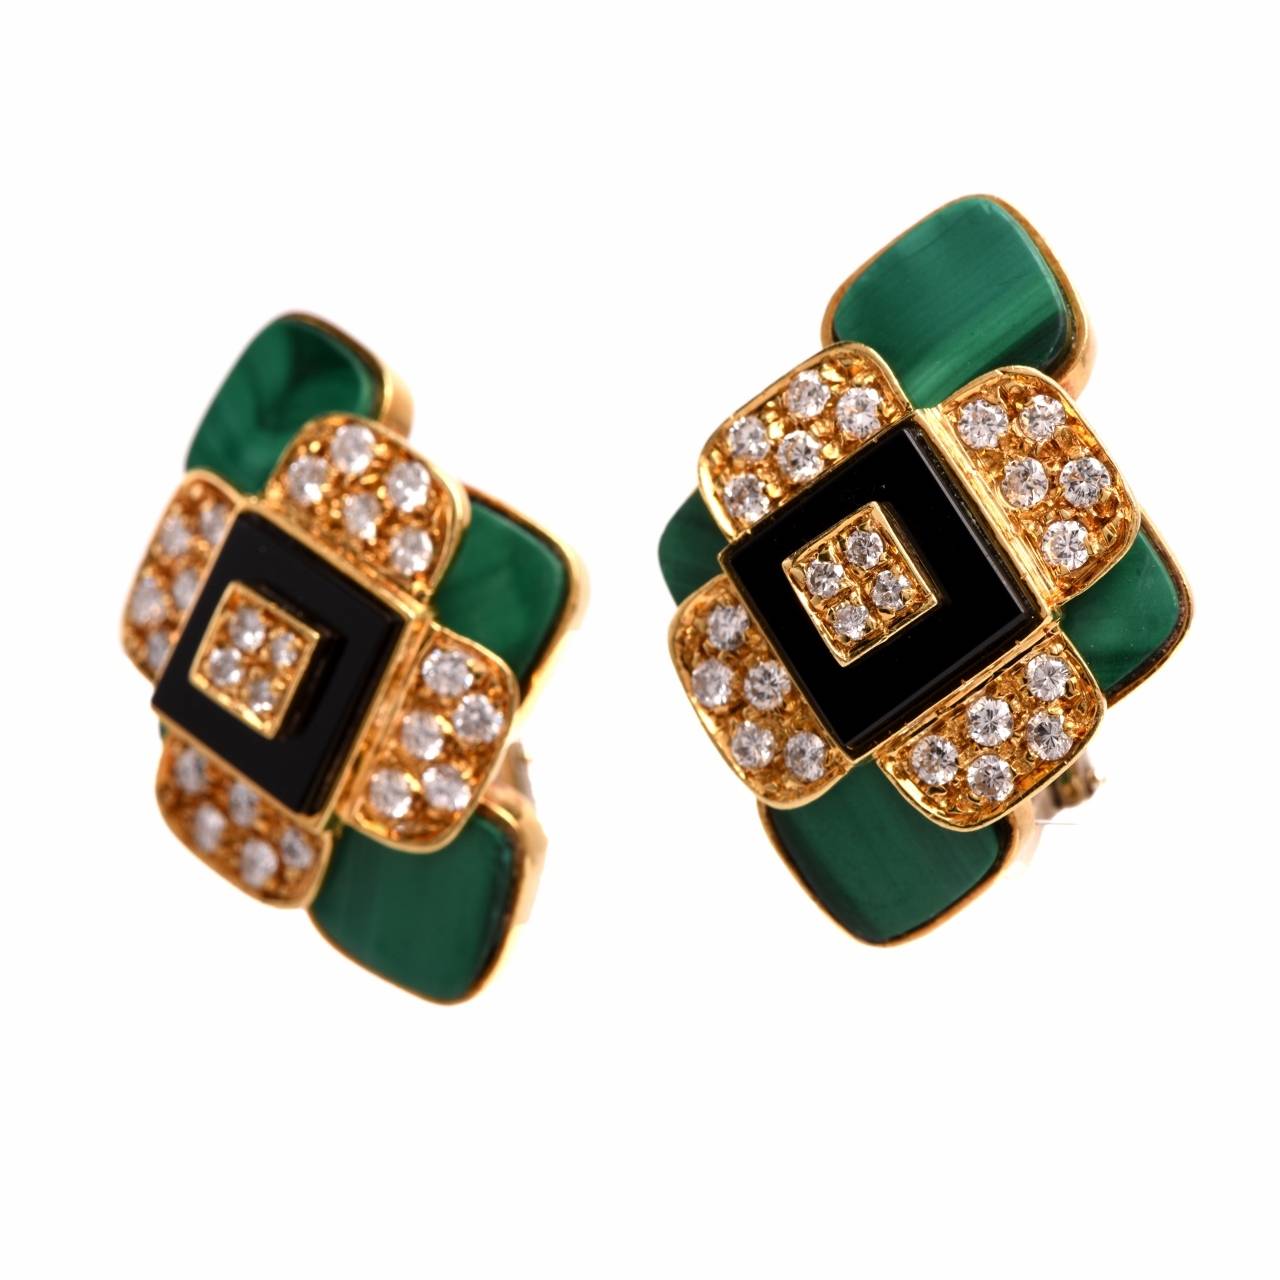 These impressive vividly colored estate earrings of opulent size are inspired by the popular style of earrings during the  1980s  era. Crafted in solid 18K yellow gold, they incorporate a pair of stylized lozenge profiles, centered with diamond,